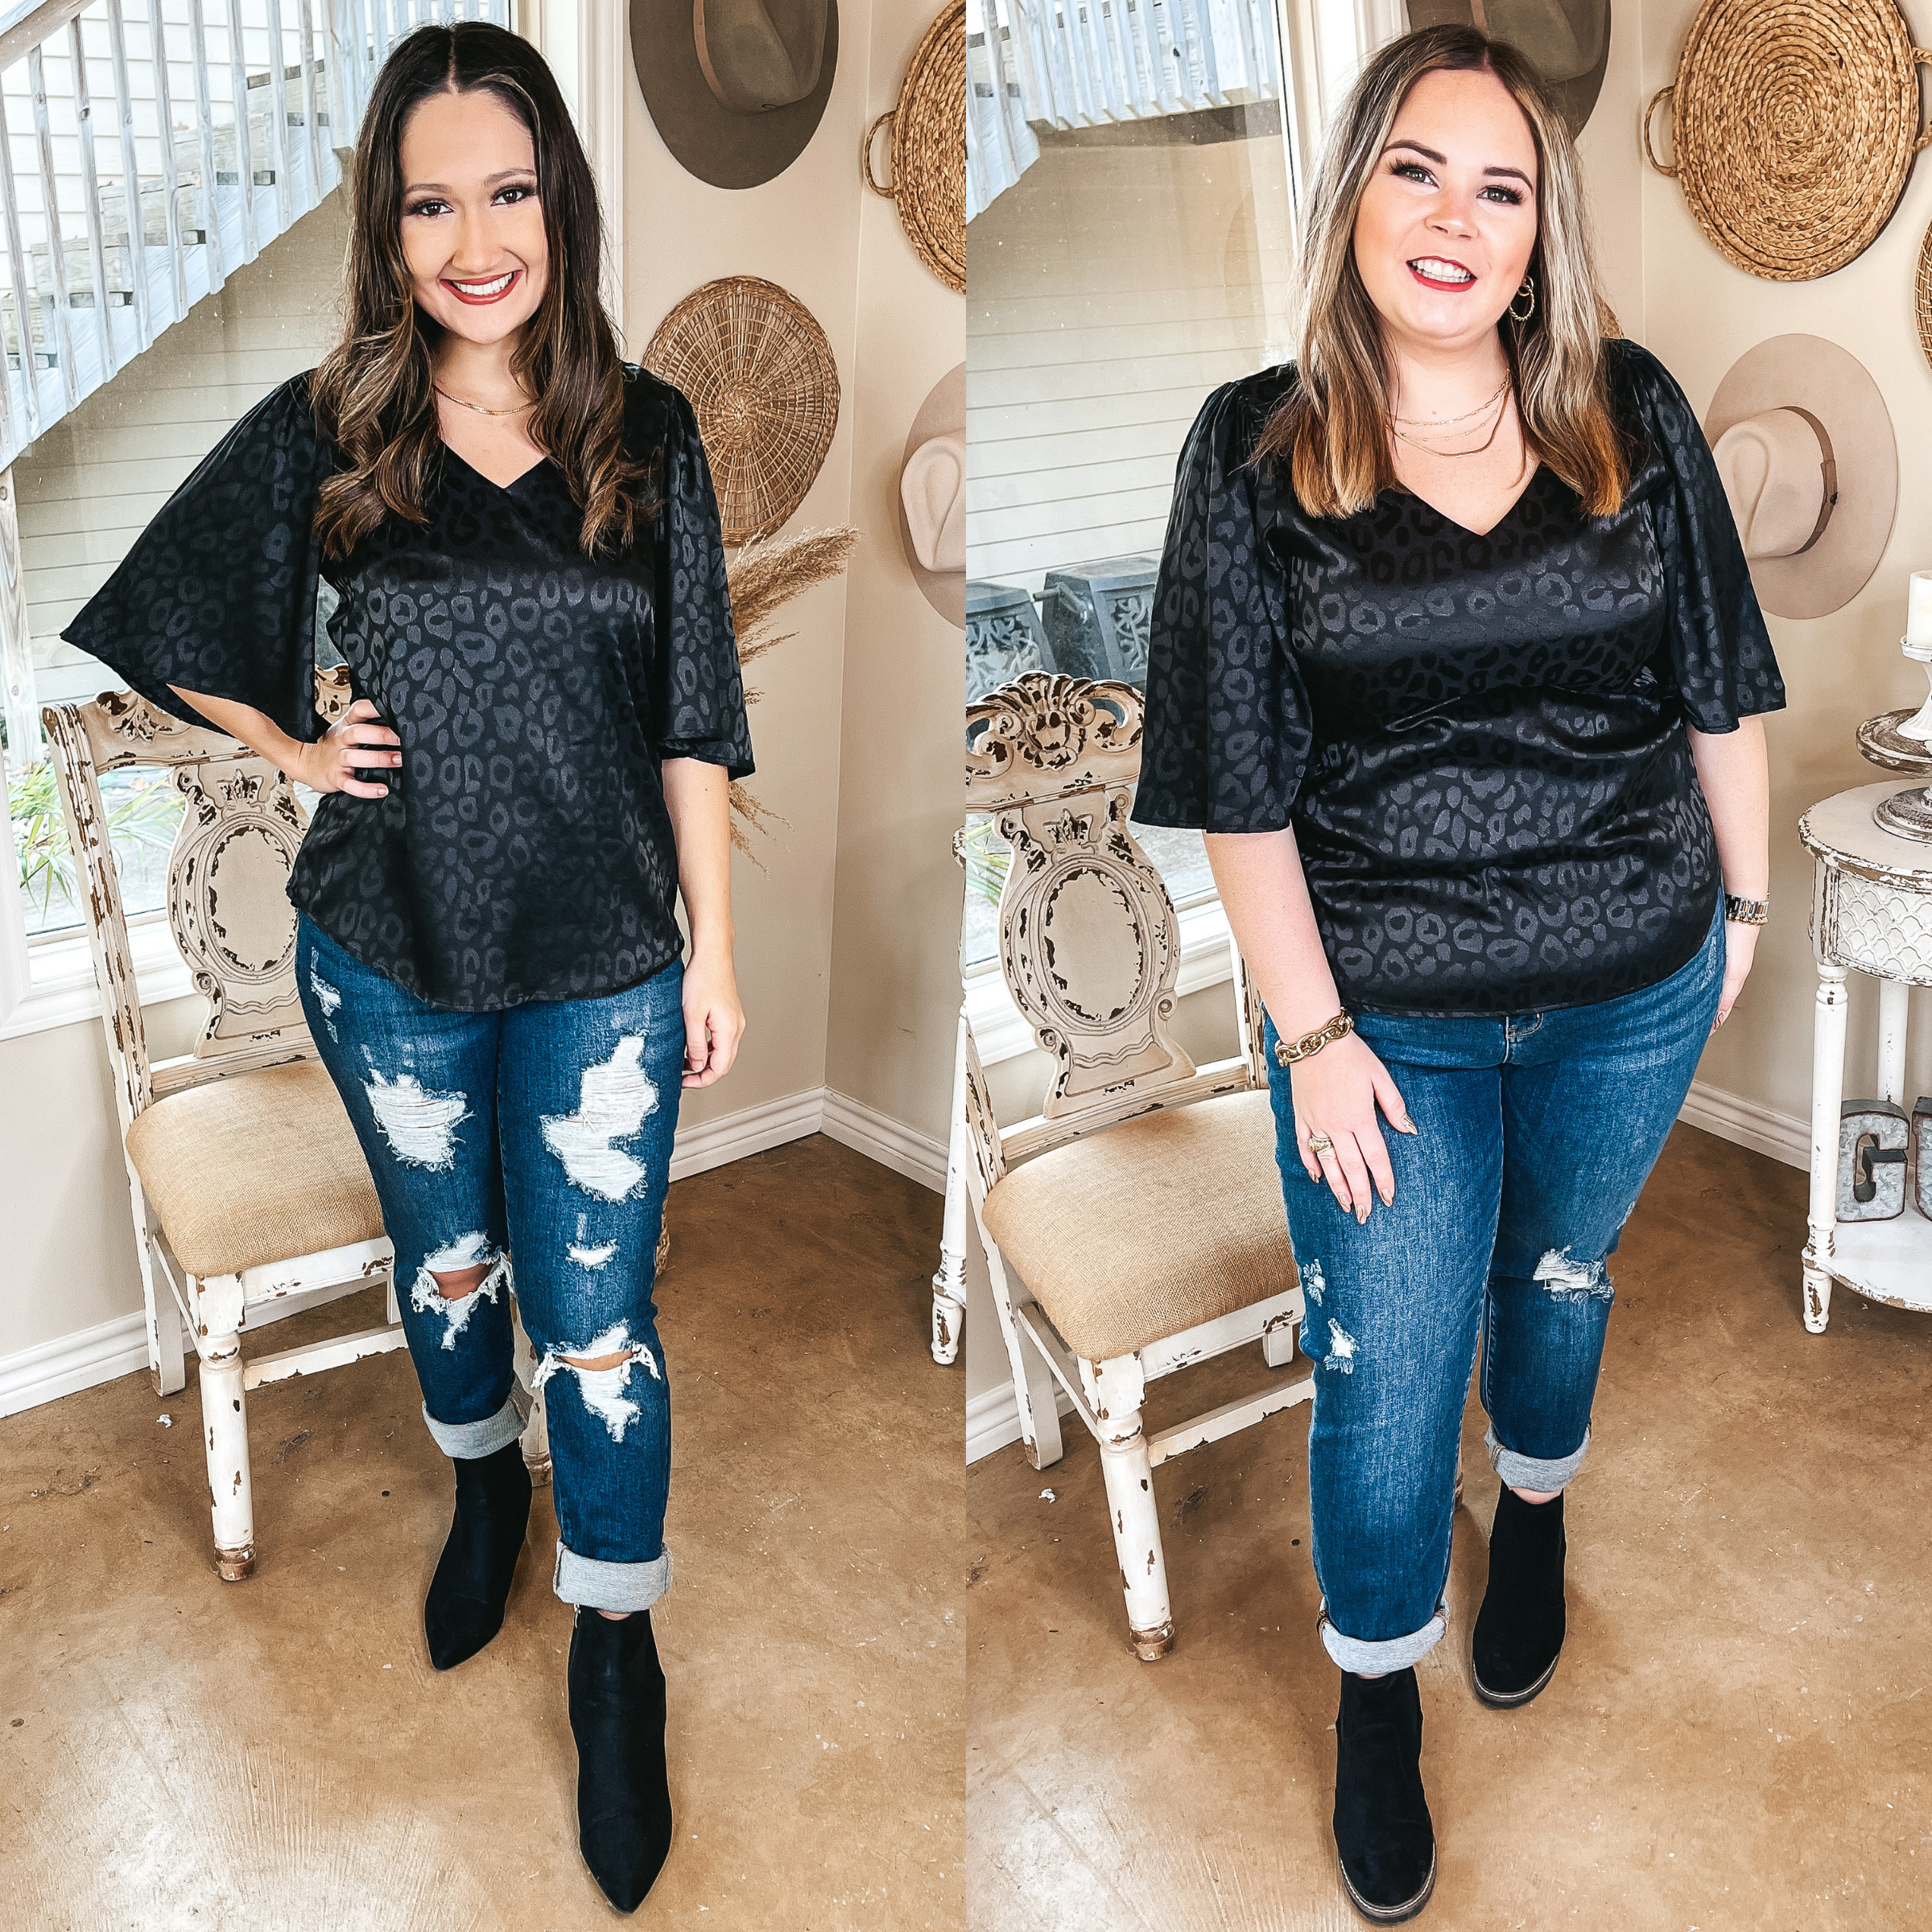 Models are wearing a black satin top with flowy sleeves and a black leopard print. Both models have it paired with distressed skinny jeans, black booties, and gold jewelry.